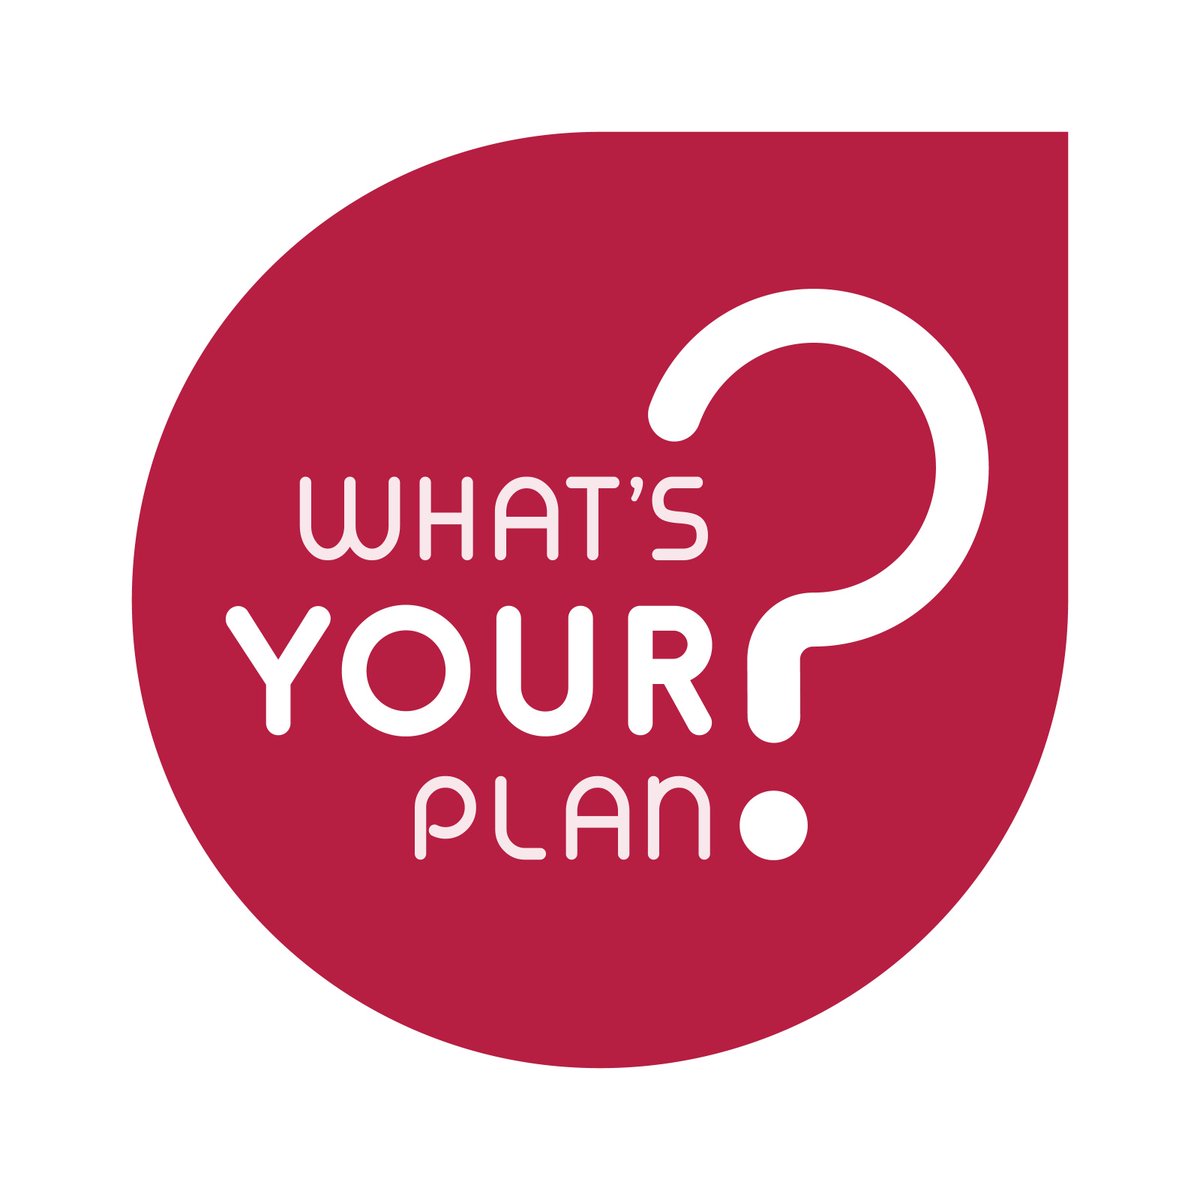 Bro, have you seen how ICEA LION is changing the game with their dope investment plans? Check out a plan with ICEA LION and get in on the action! #WhatsYourPlan